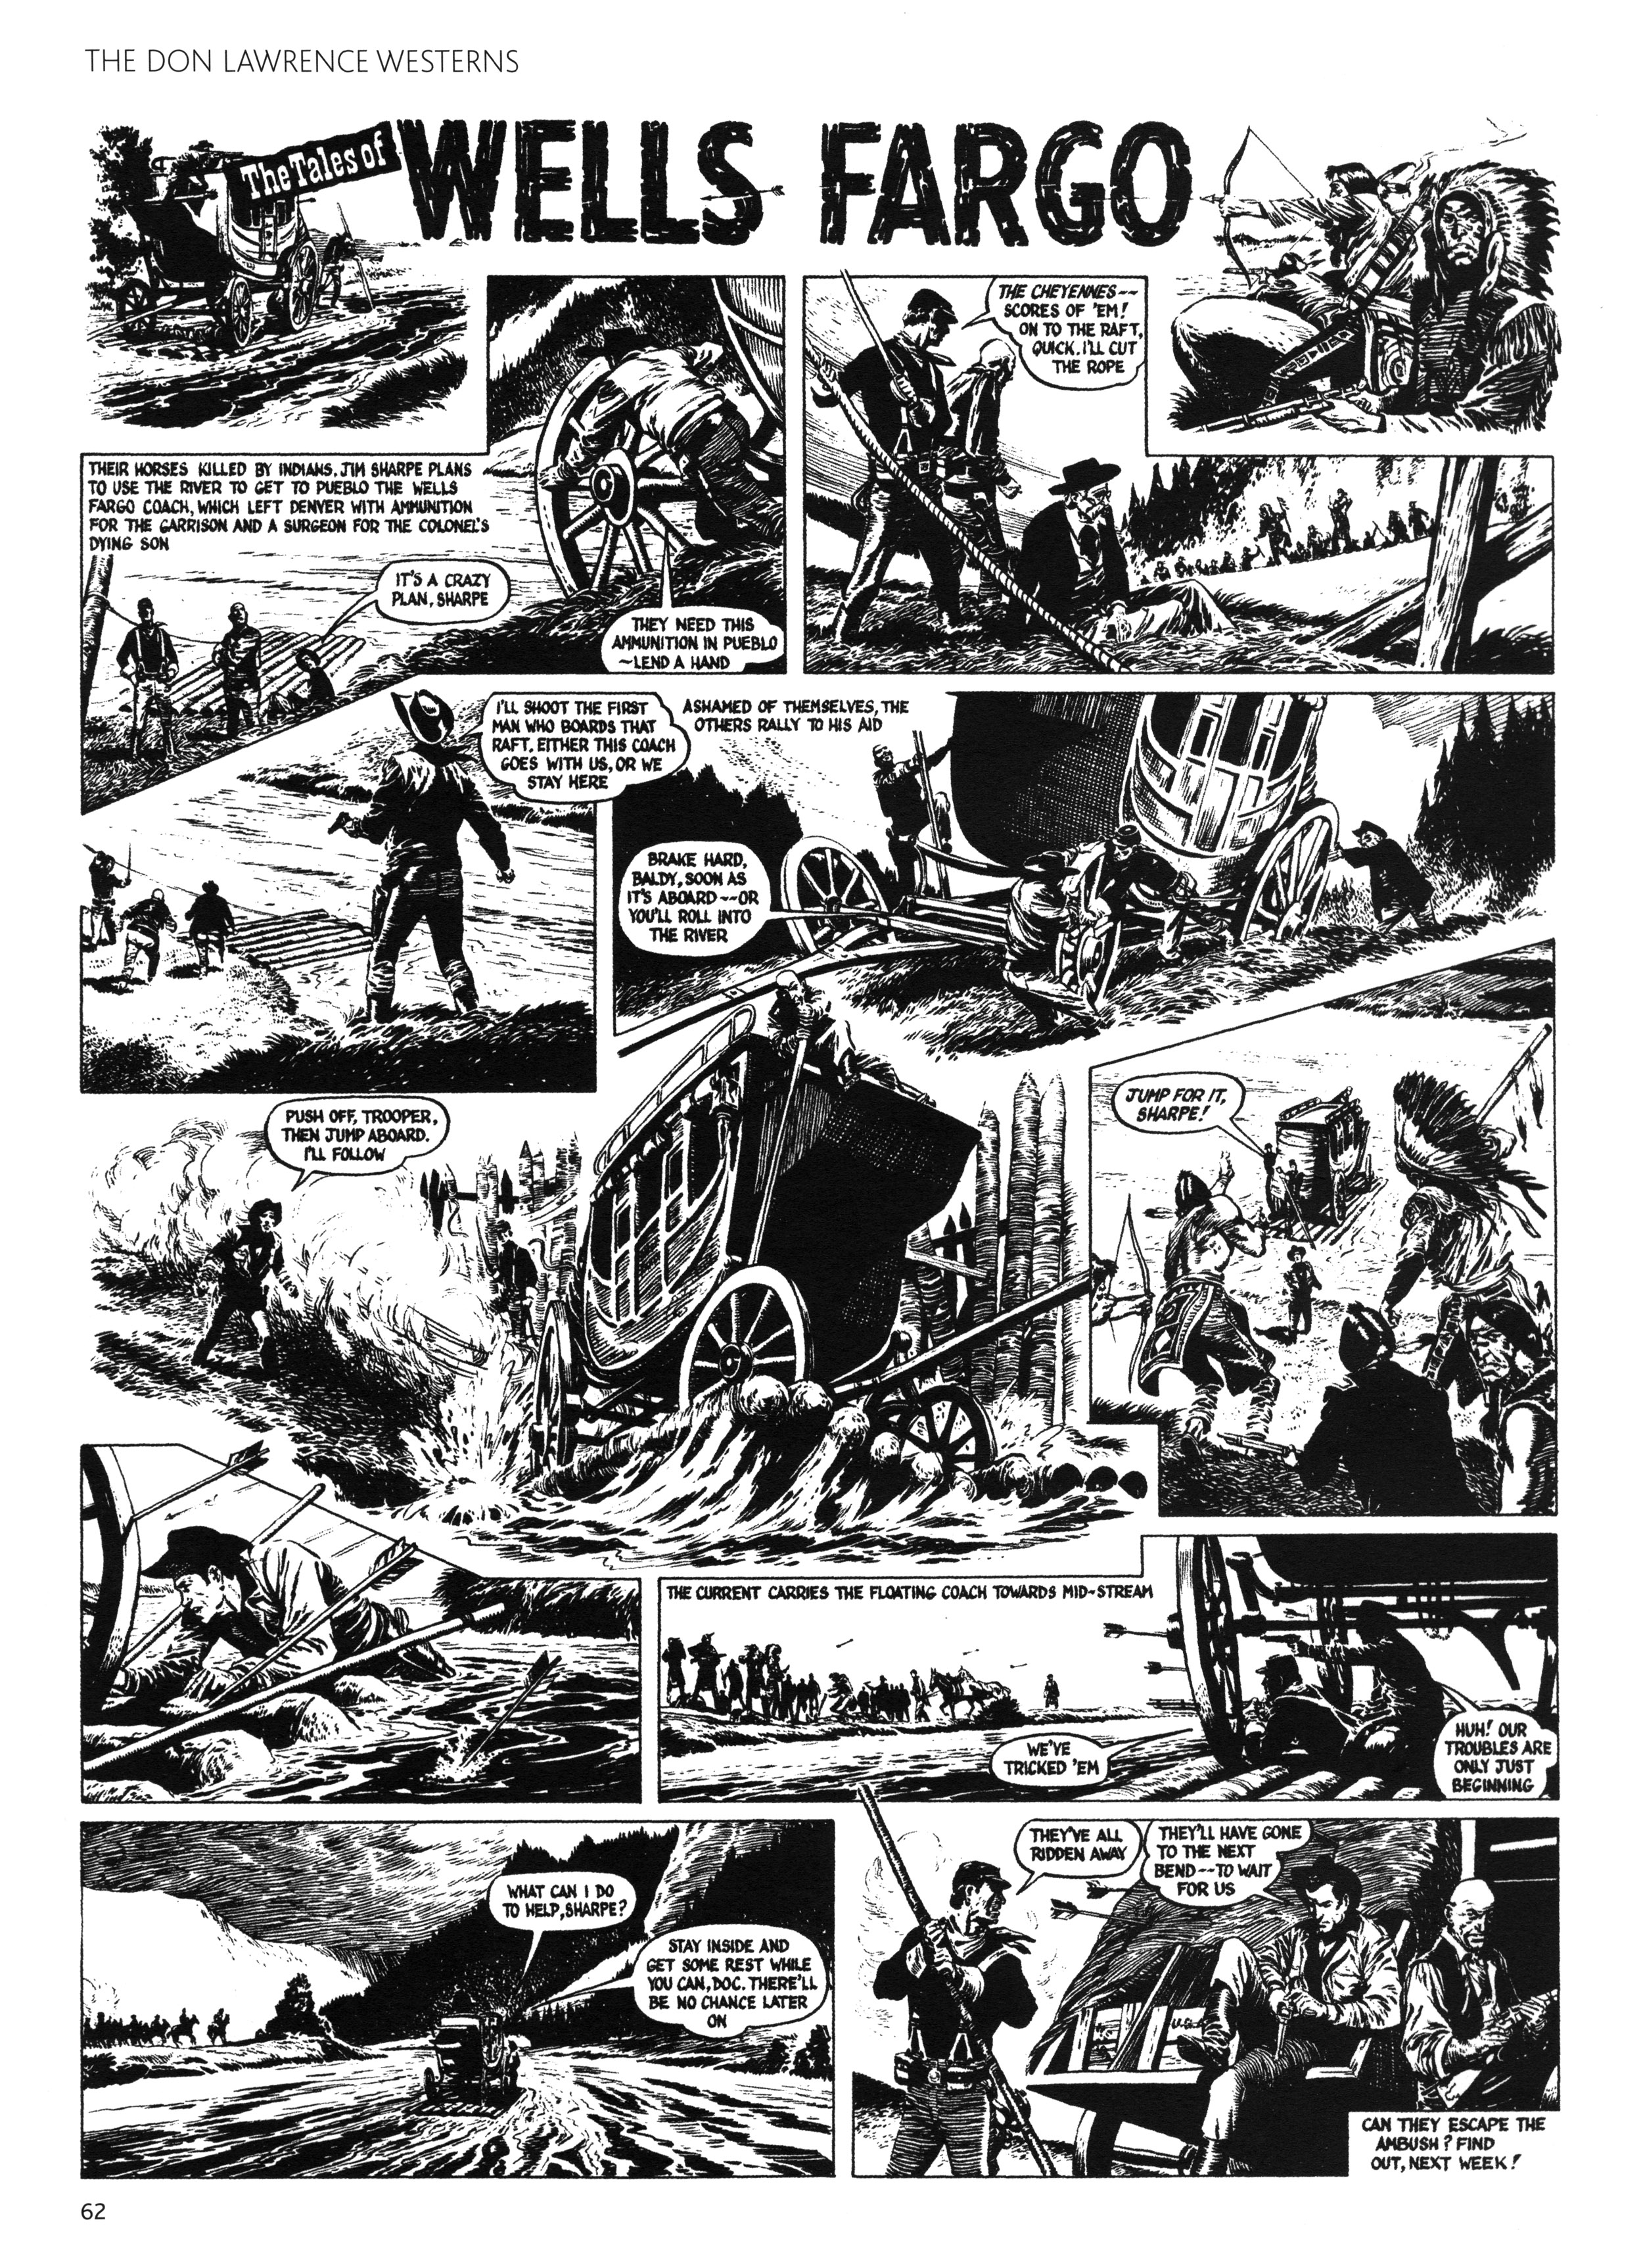 Read online Don Lawrence Westerns comic -  Issue # TPB (Part 1) - 66